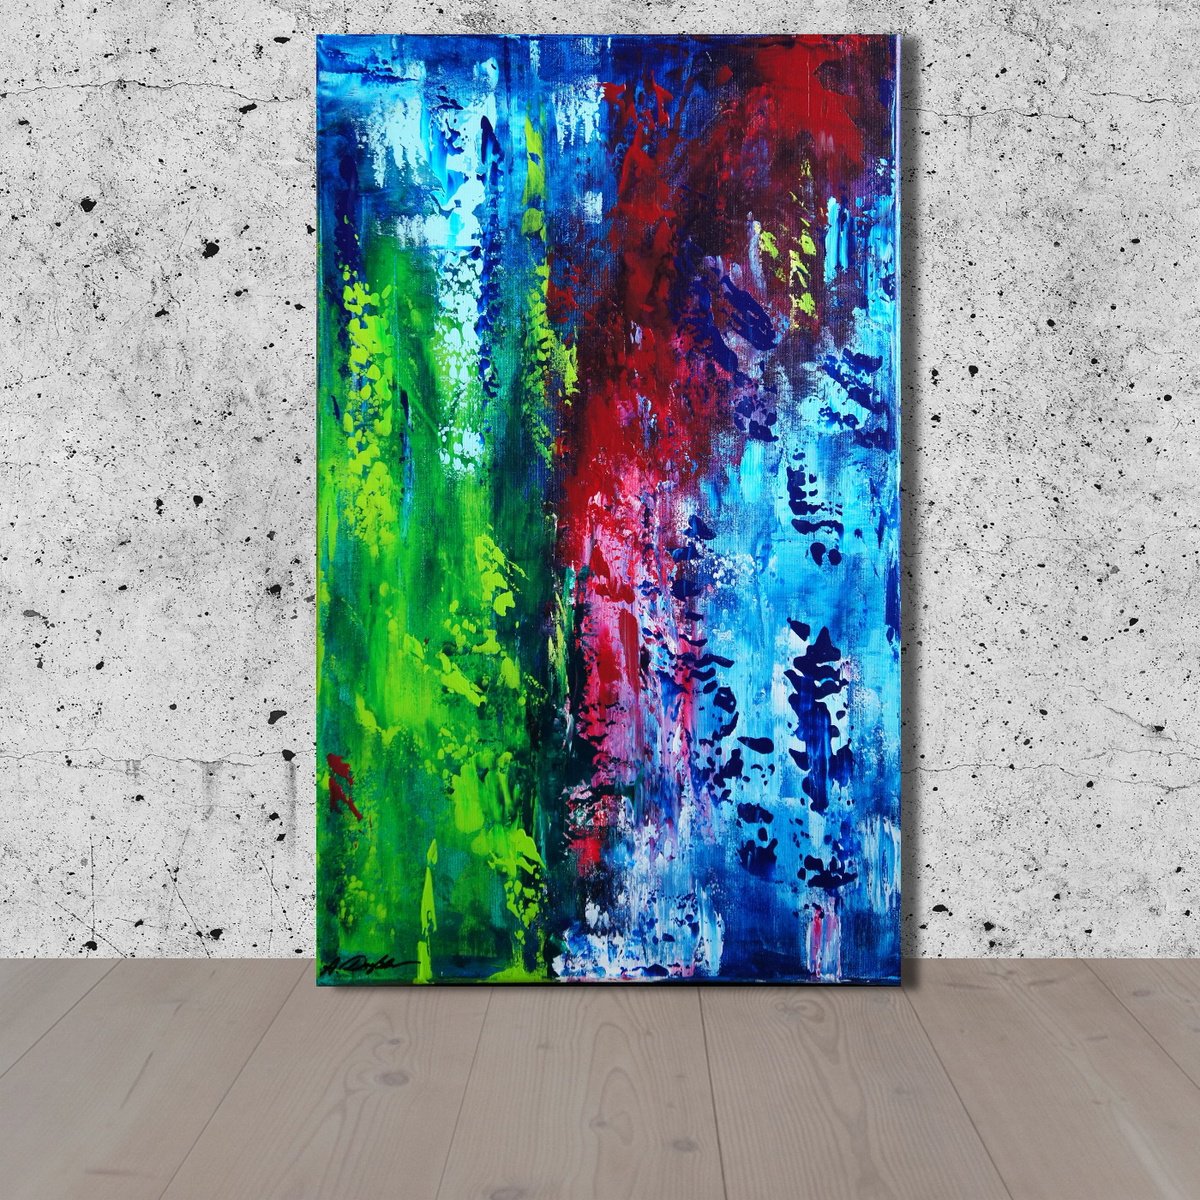 Color Avalanche (50 x 80cm) (20x32inches) by Ansgar Dressler